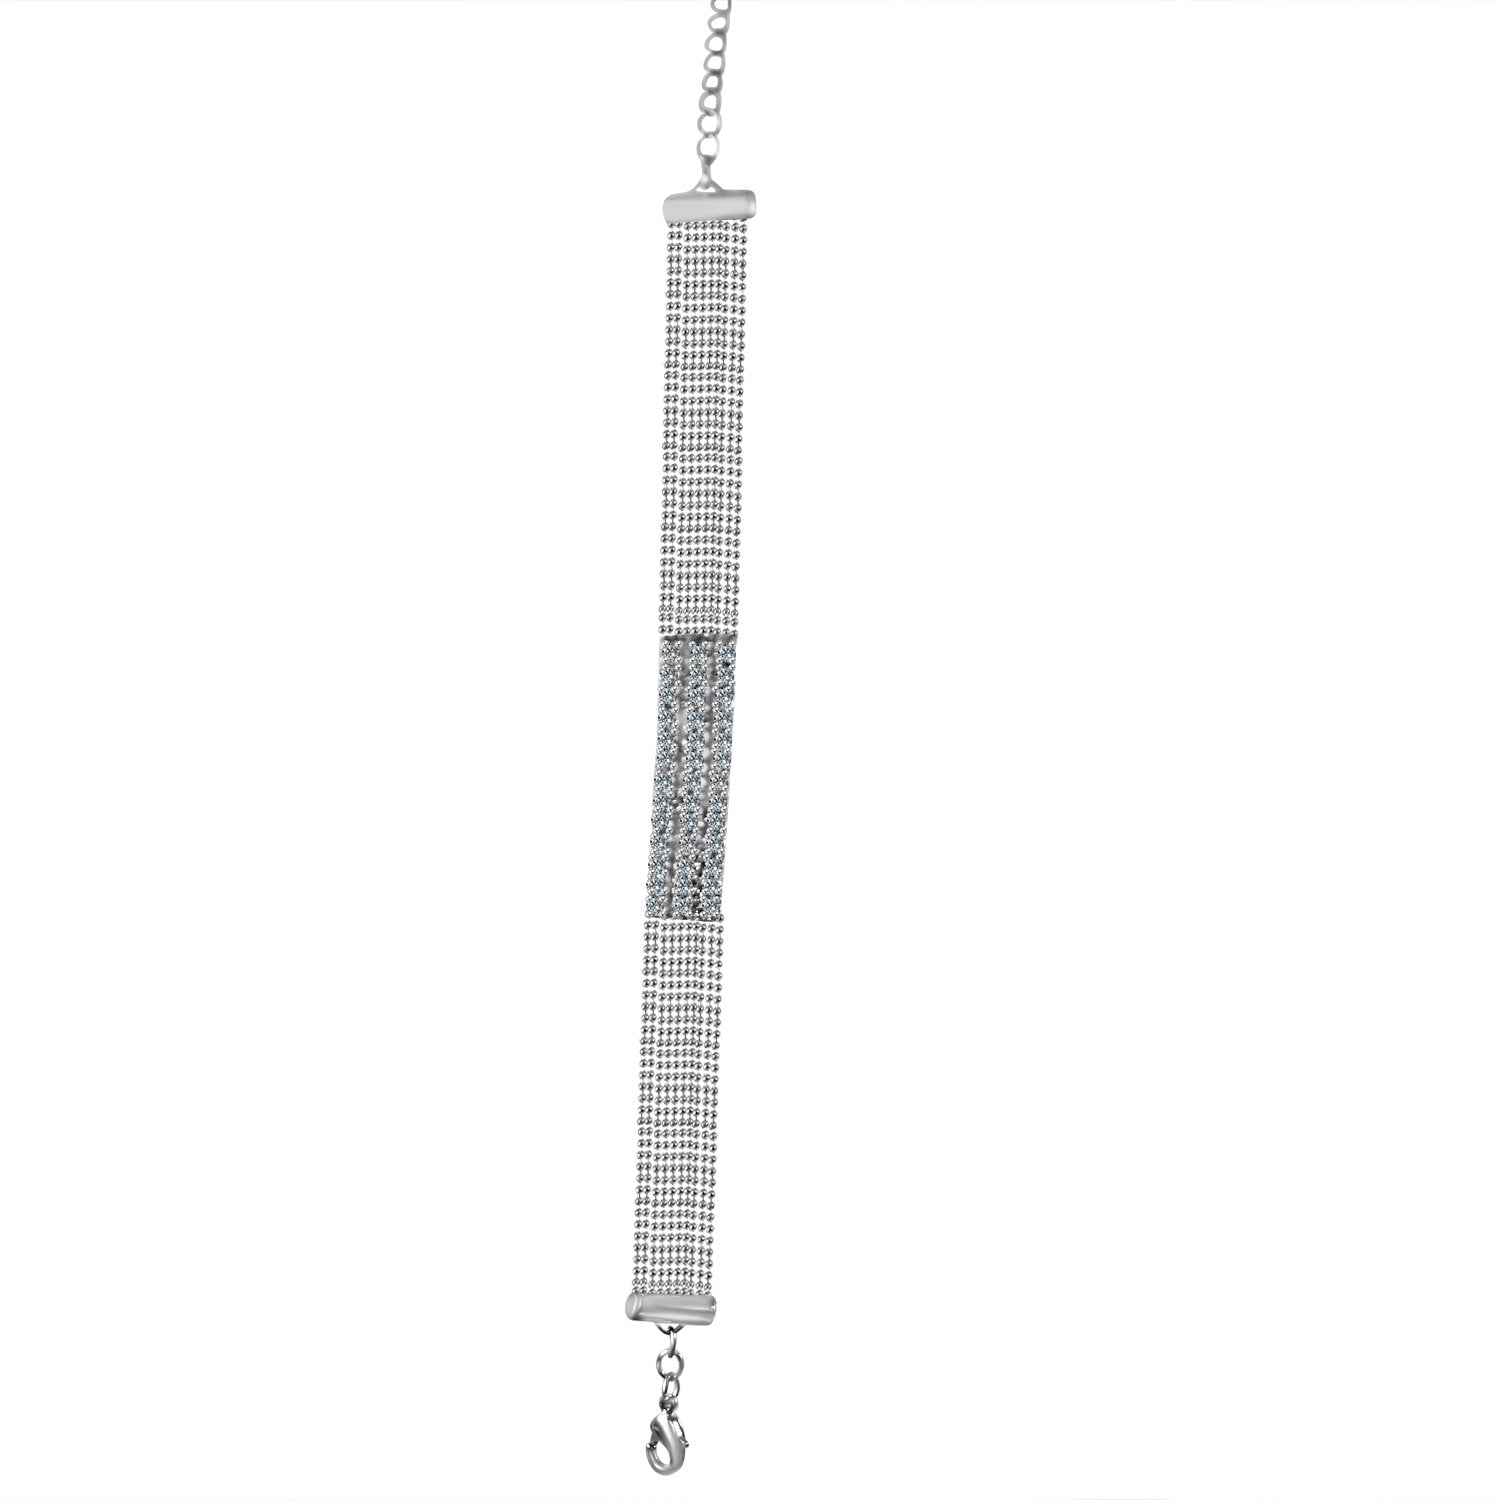 FINE CRYSTAL RHINESTONES PAVE RECTANGLE CENTER ON MULTI-BEADS CHAIN STRANDS CHOKER NECKLACE 700C716